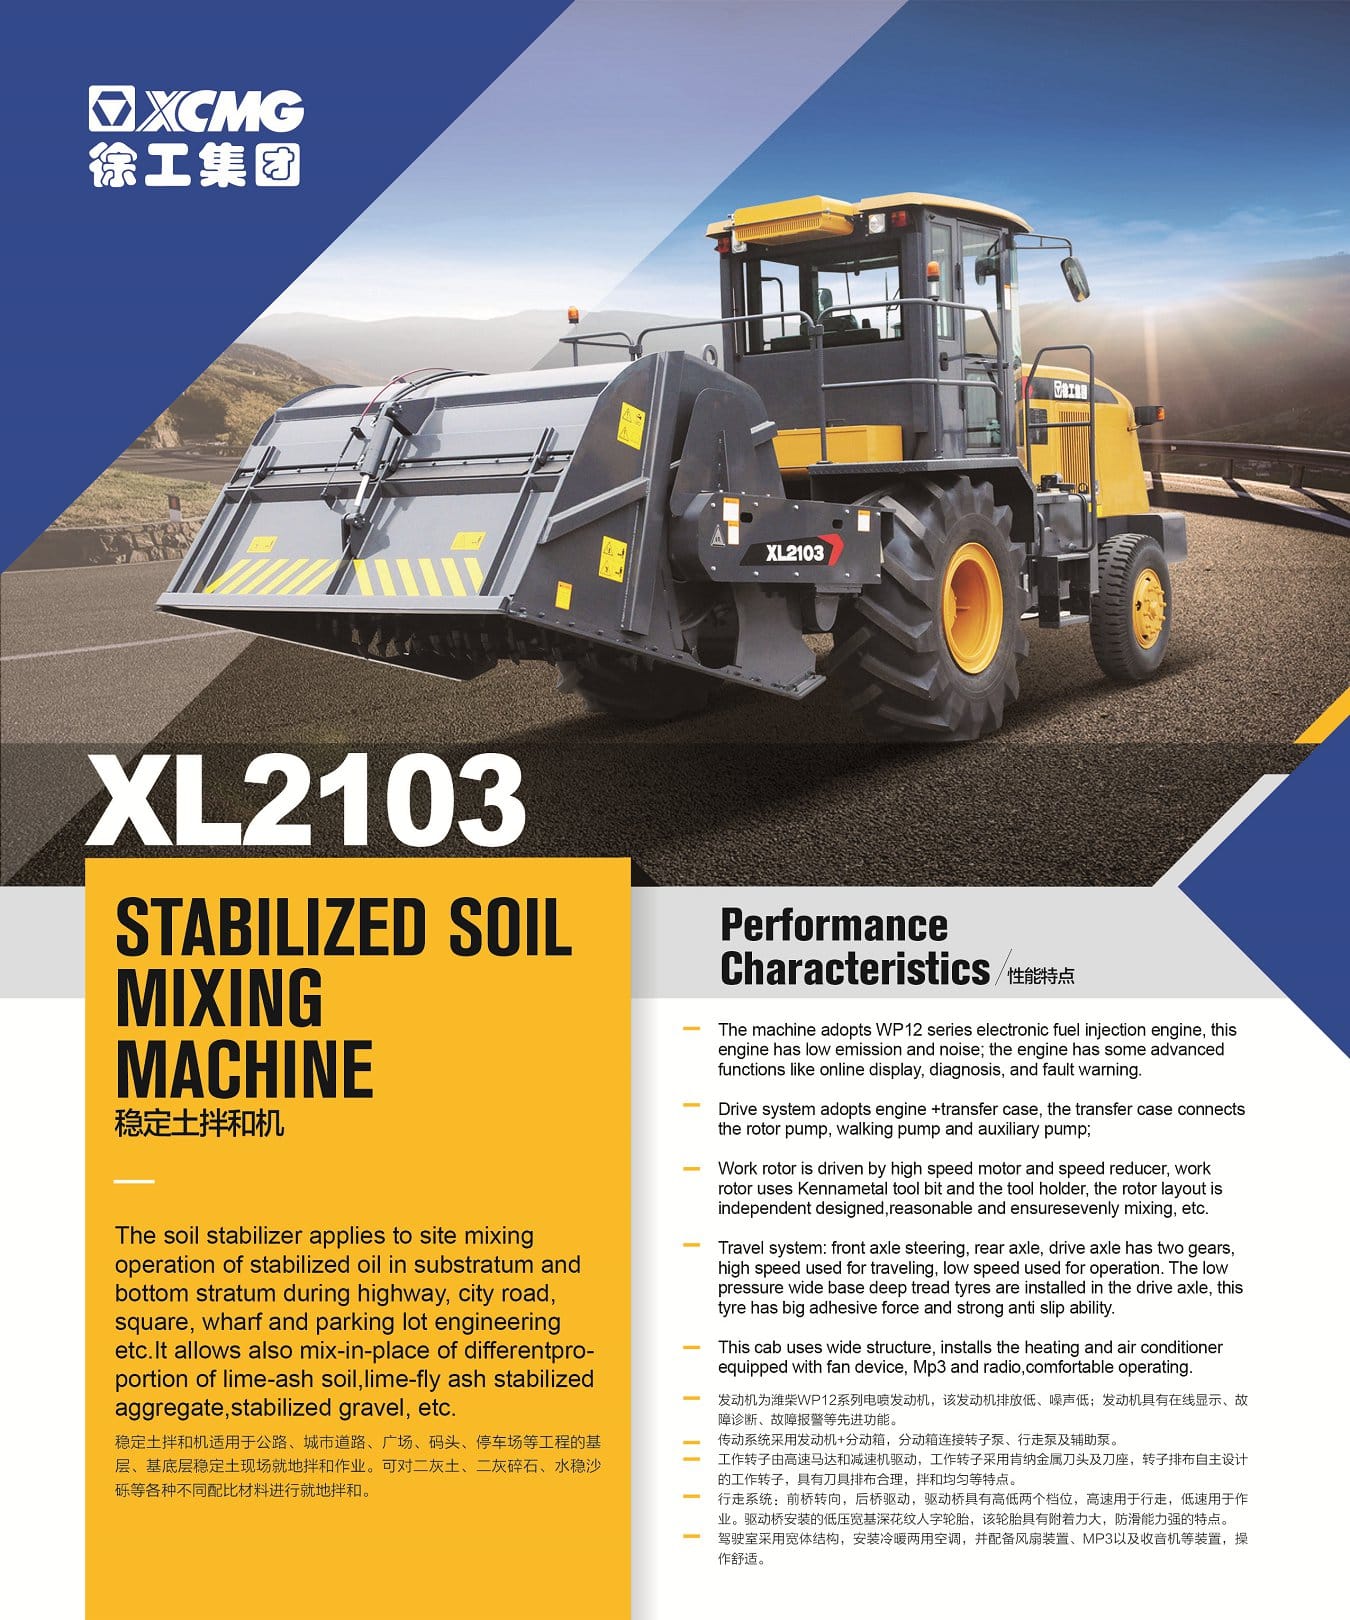 XCMG Official Road Stabilized Soil Mixing Machine XL2103 For Sale